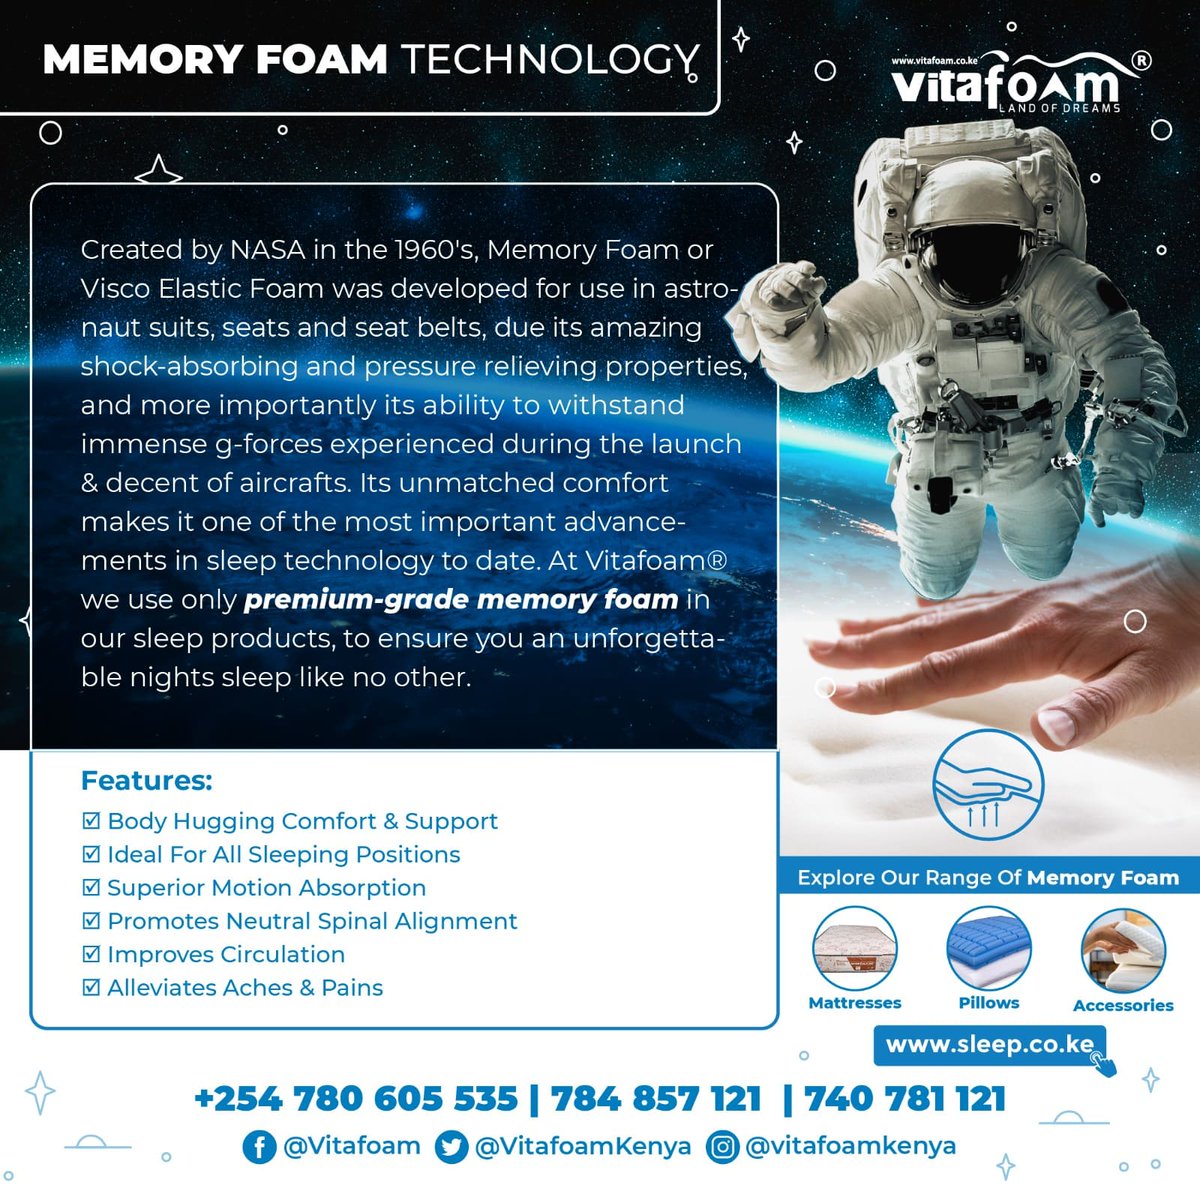 🌟☁️🚀🙋‍♂️🛏️ Experience Premium Comfort & Support With Our Amazing #MemoryFoam Sleep Technology Products Only From #VitaFoamKenya® 🛏️🙋‍♀️🚀☁️🌟

☎ For All *Enquiries, *Orders and *Deliveries: +254 780 605 535 | 784 857 121 | 740 781 121

📍 Our Locations >>> bit.ly/30VqOrf